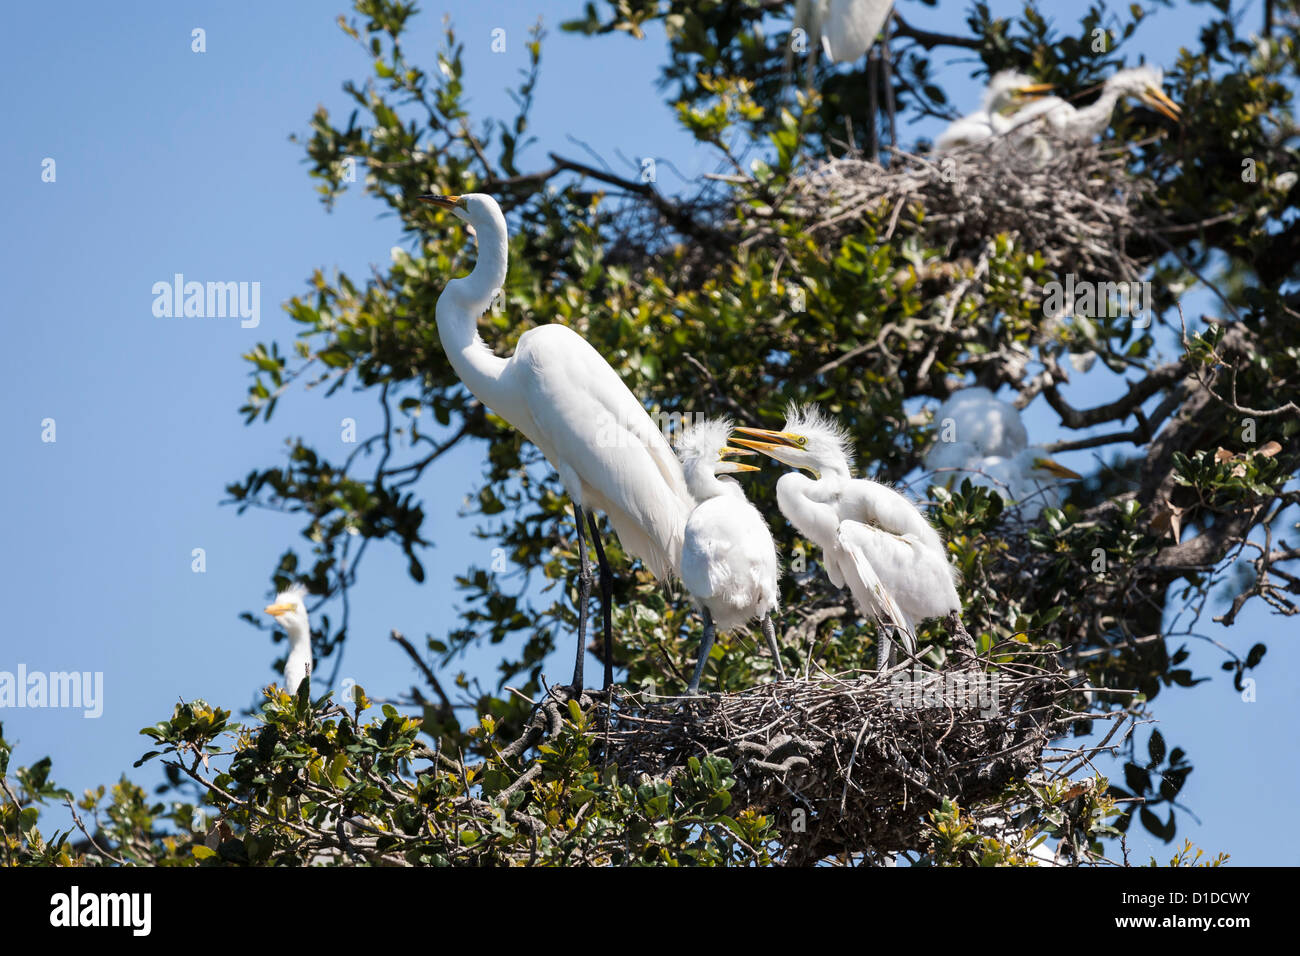 Great Egret (Ardea alba) with chicks in nest at St. Augustine Alligator Farm Zoological Park rookery in Florida Stock Photo